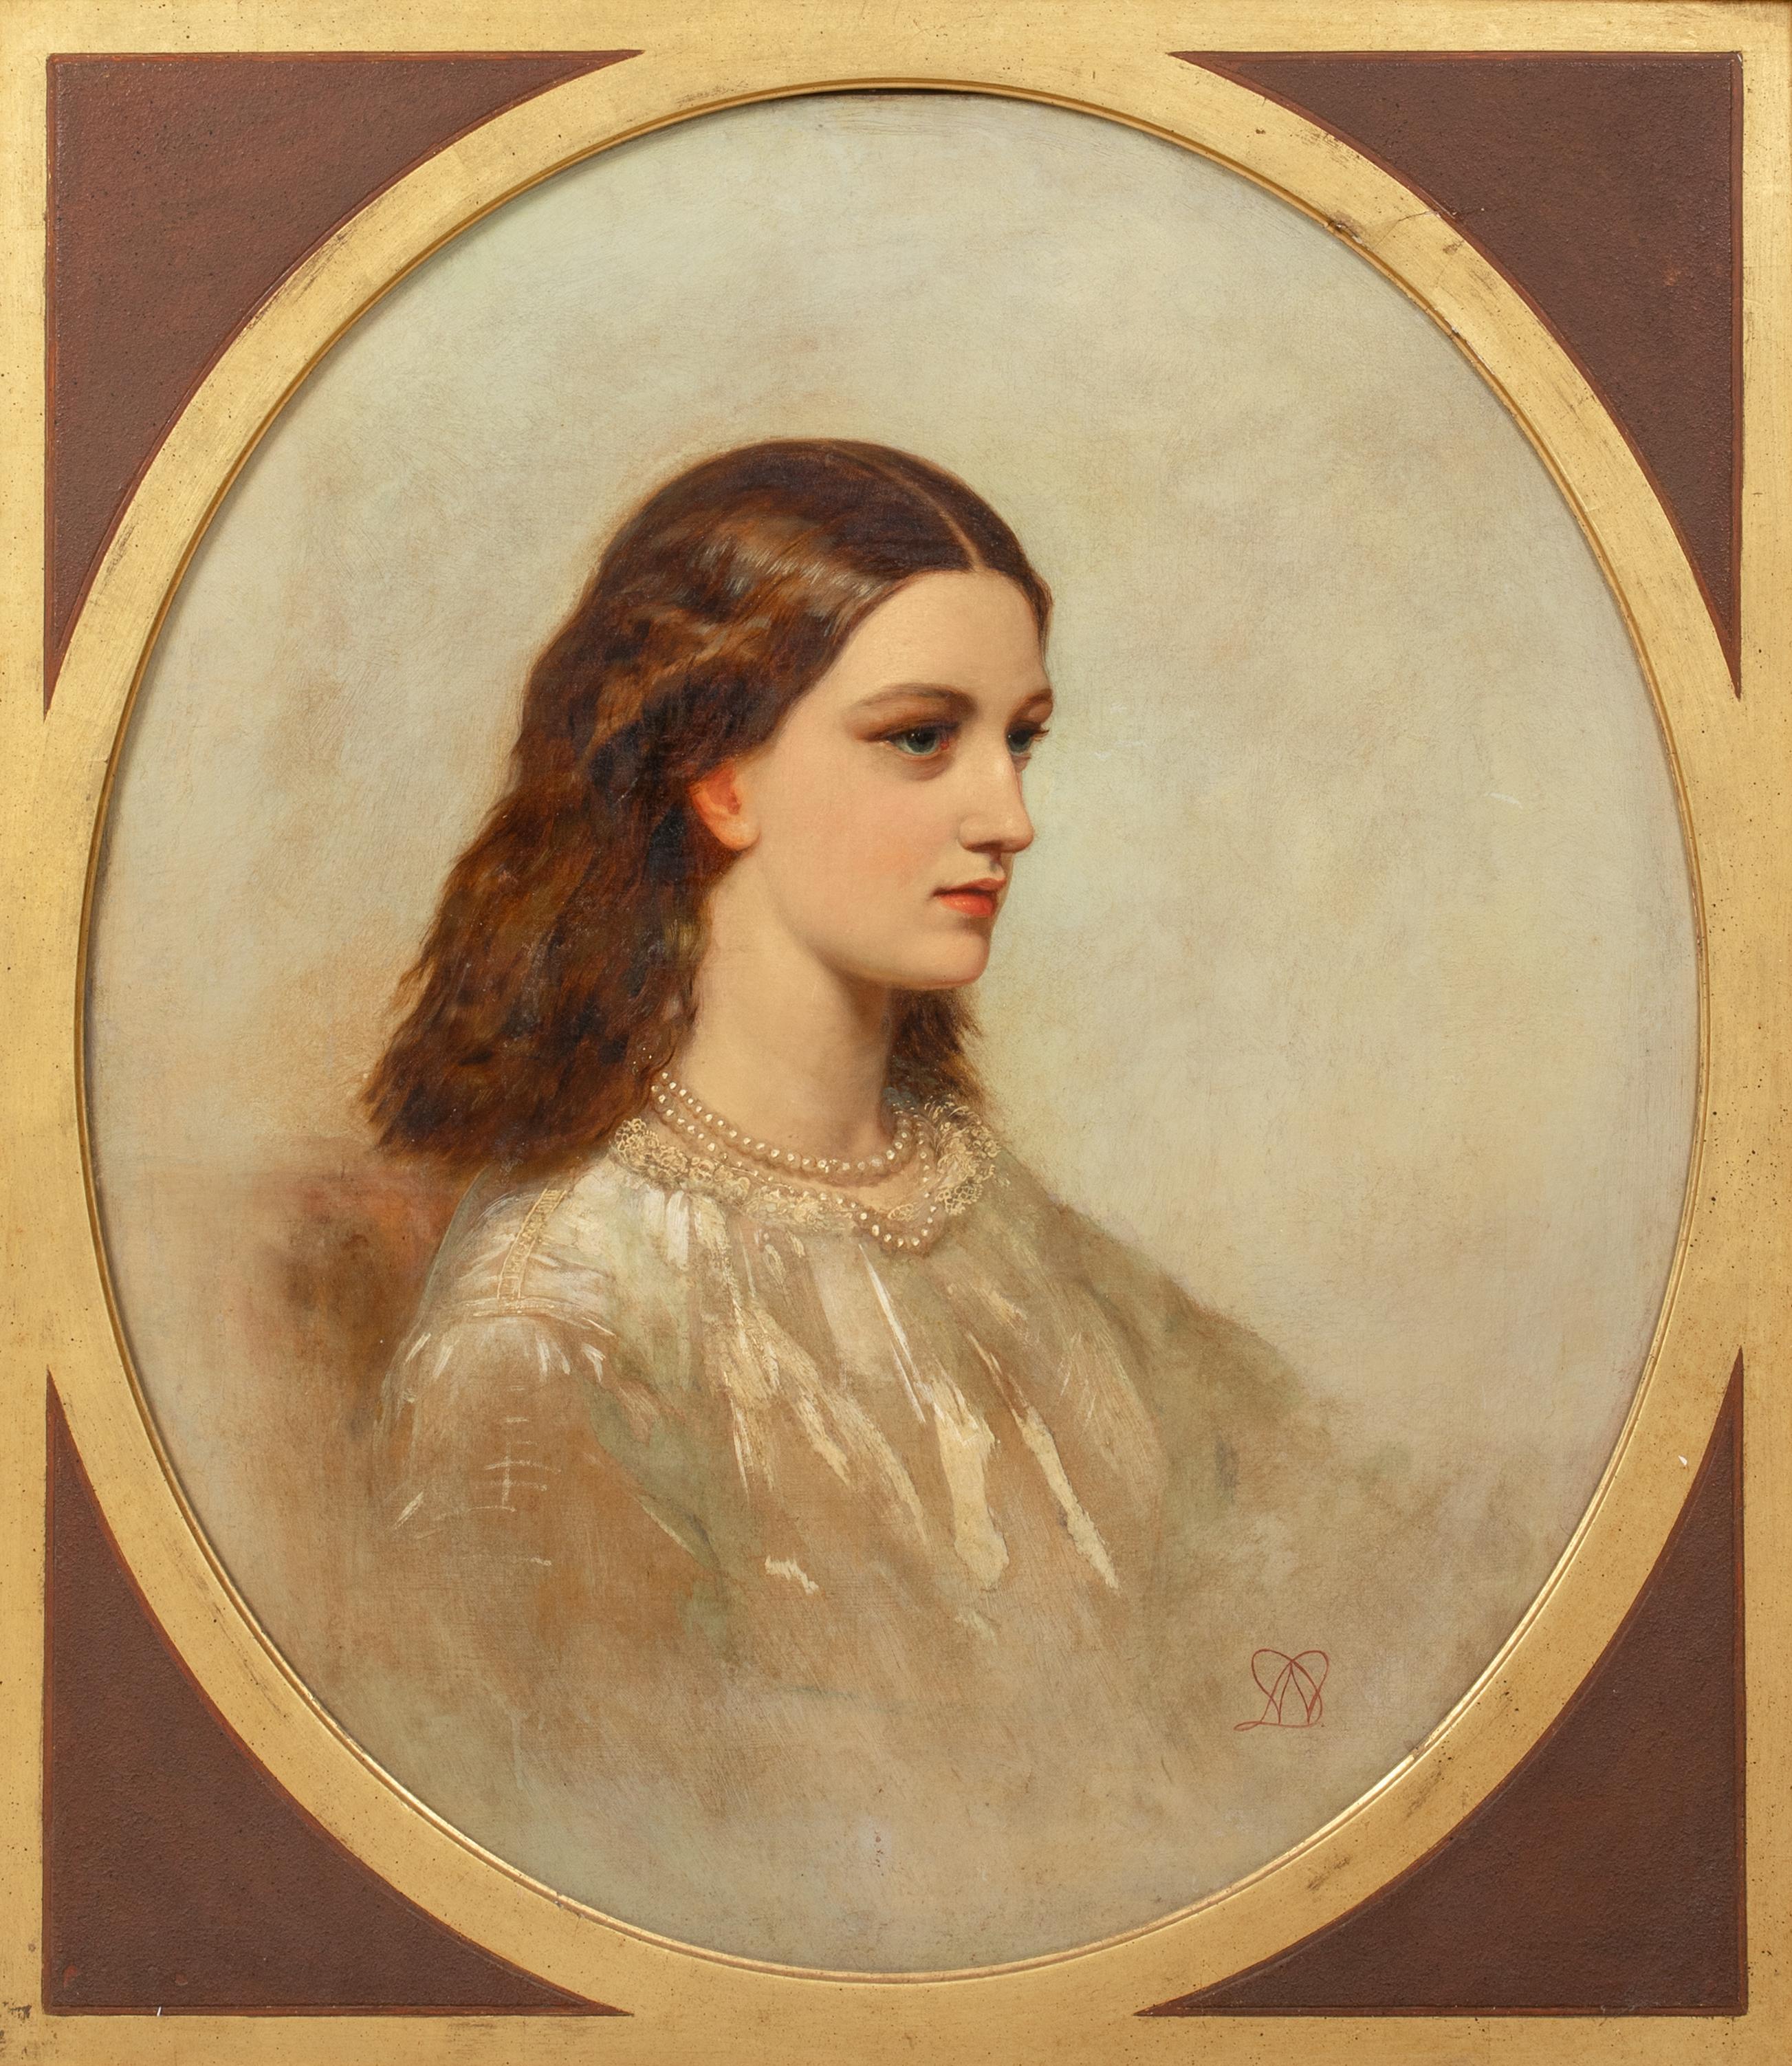 Portrait of Rebecca Solomon, 19th Century

monogrammed WM - attributed to (1834-1896)

Large 19th century portrait of a lady, Rebecca Solomon, oil on canvas attributed to William Morris. Excellent quality and condition oval study of the young lady